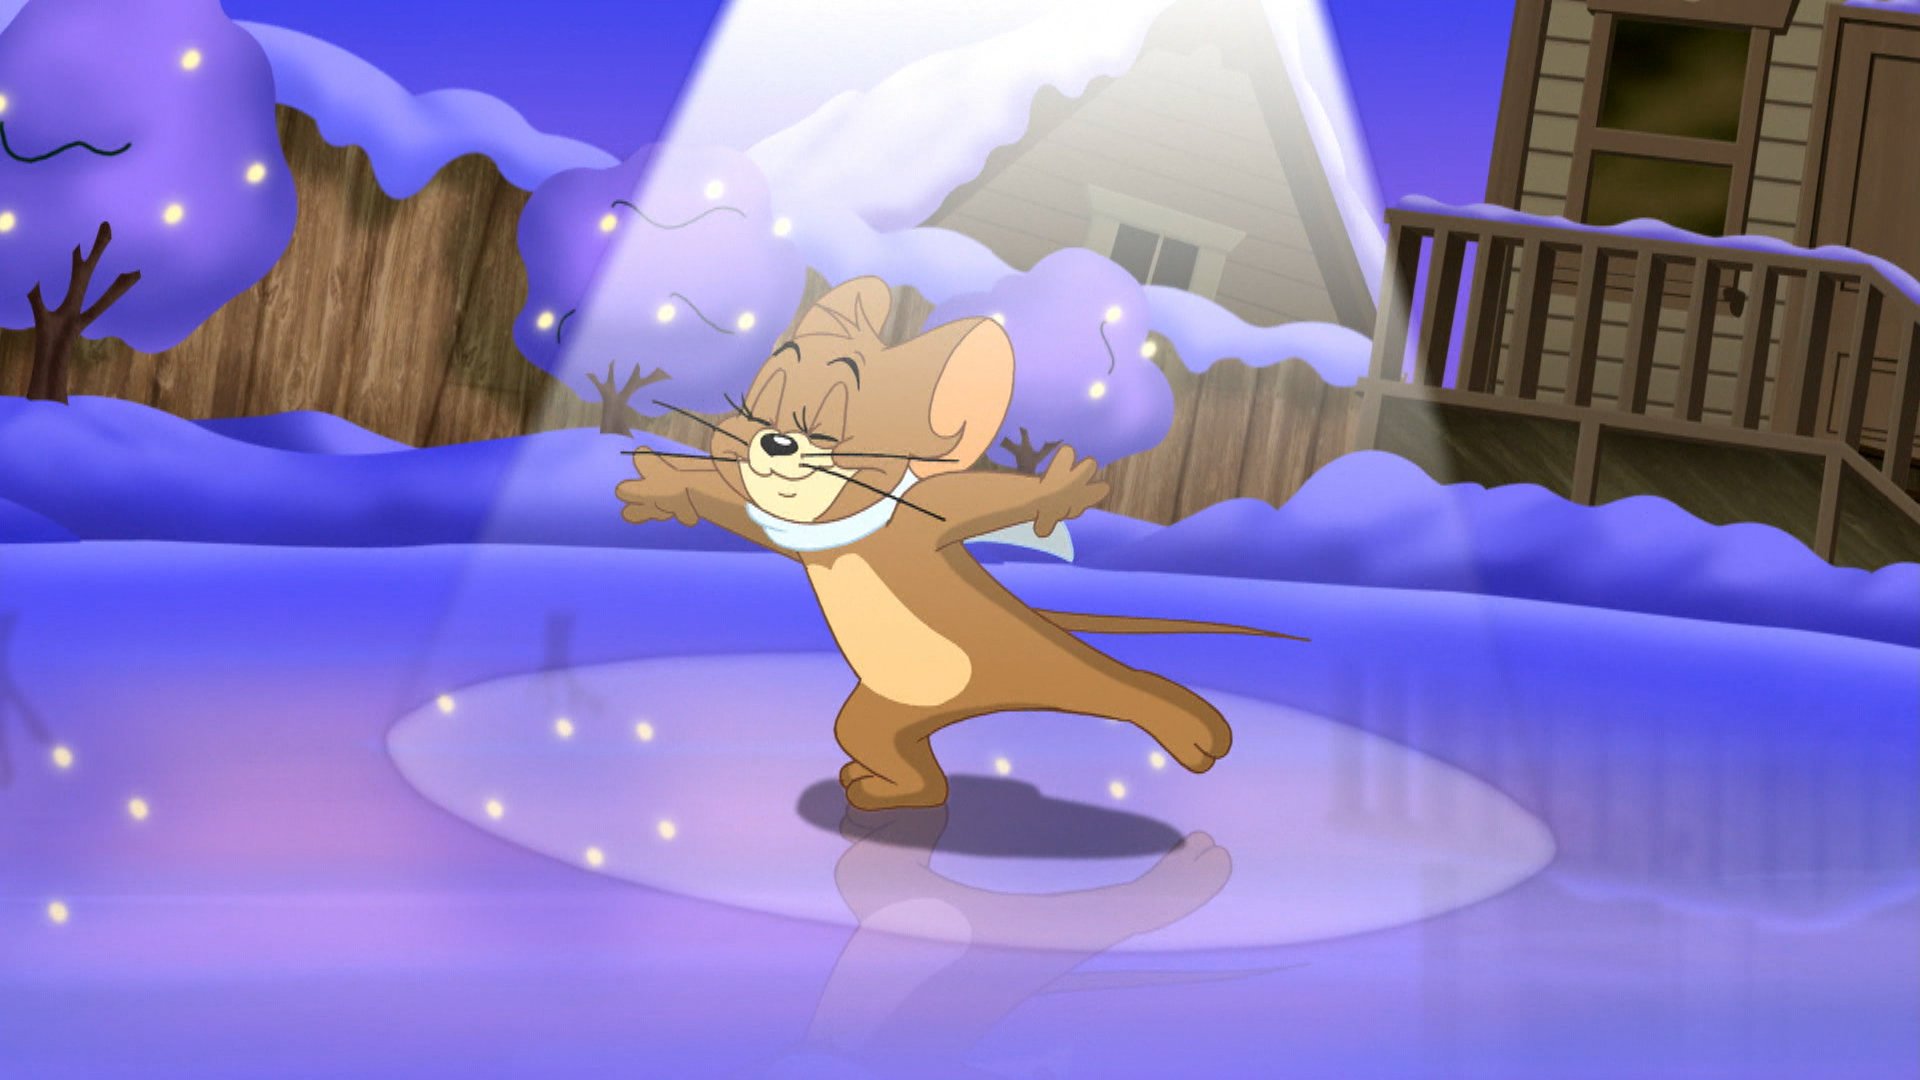 Watch Tom and Jerry Tales Season 2 Episode 10 Online - Stream Full Episodes